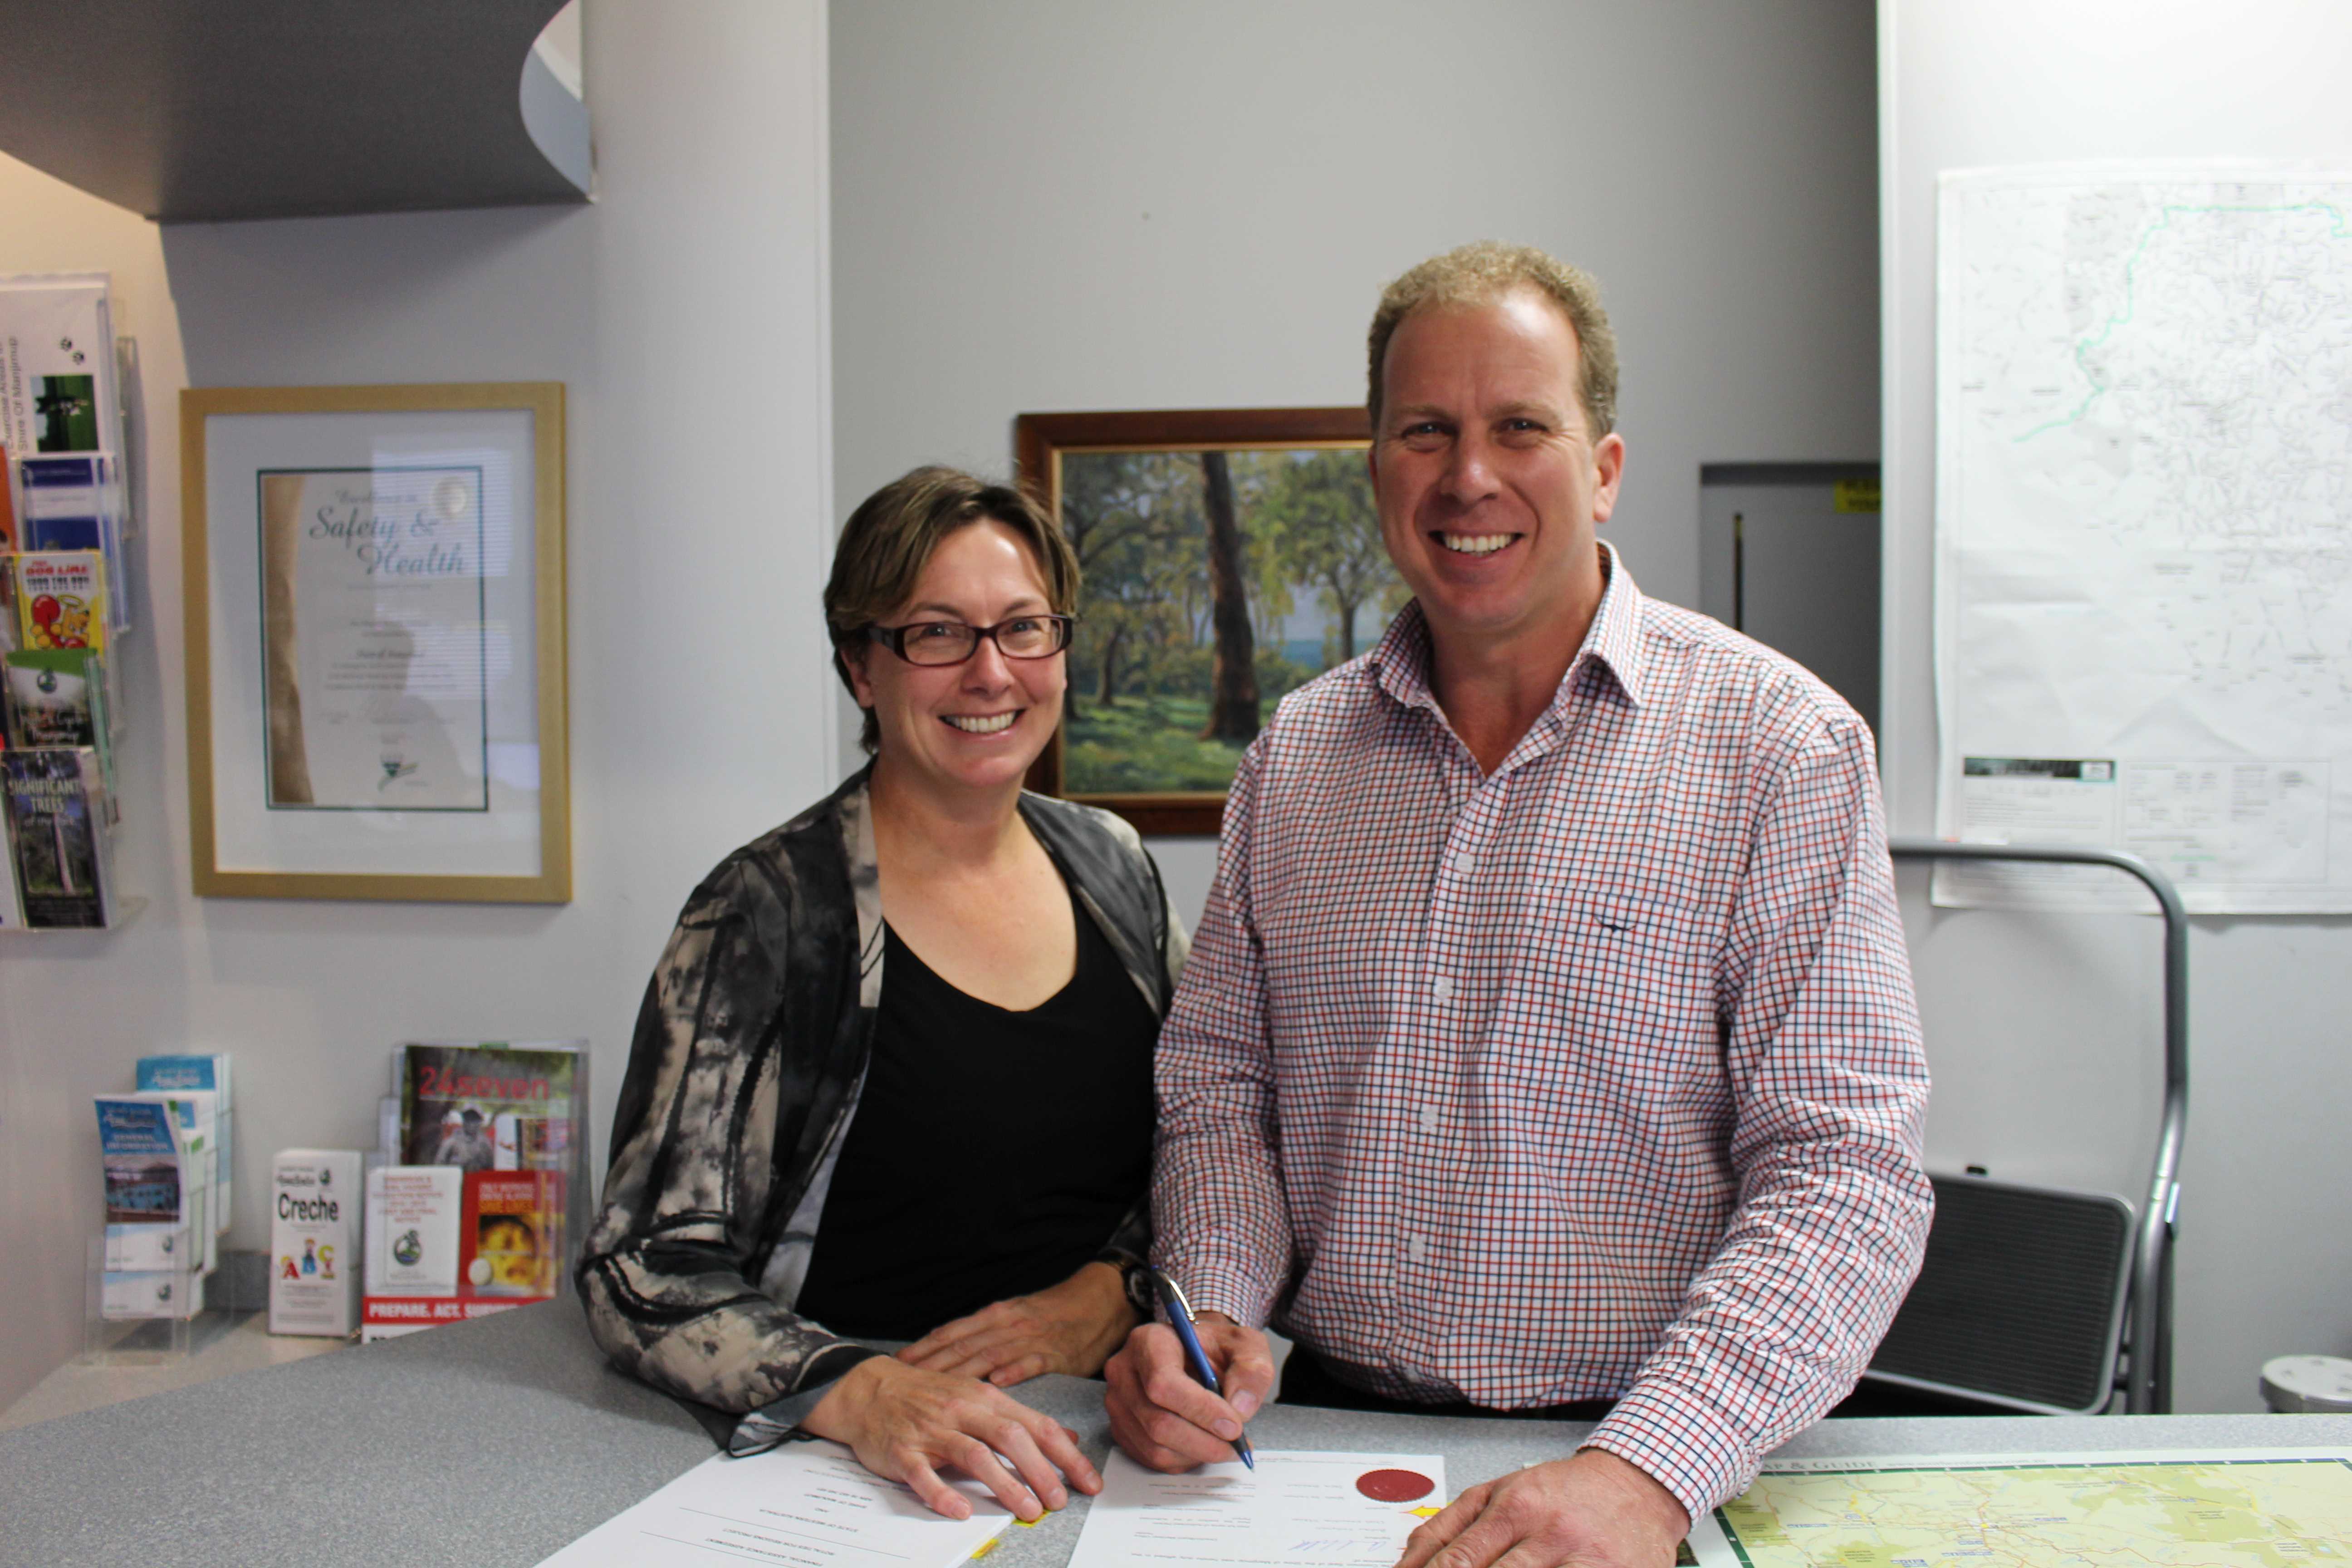 Director of Community Services and Shire President signing the funding agreement for the Seniors Housing.